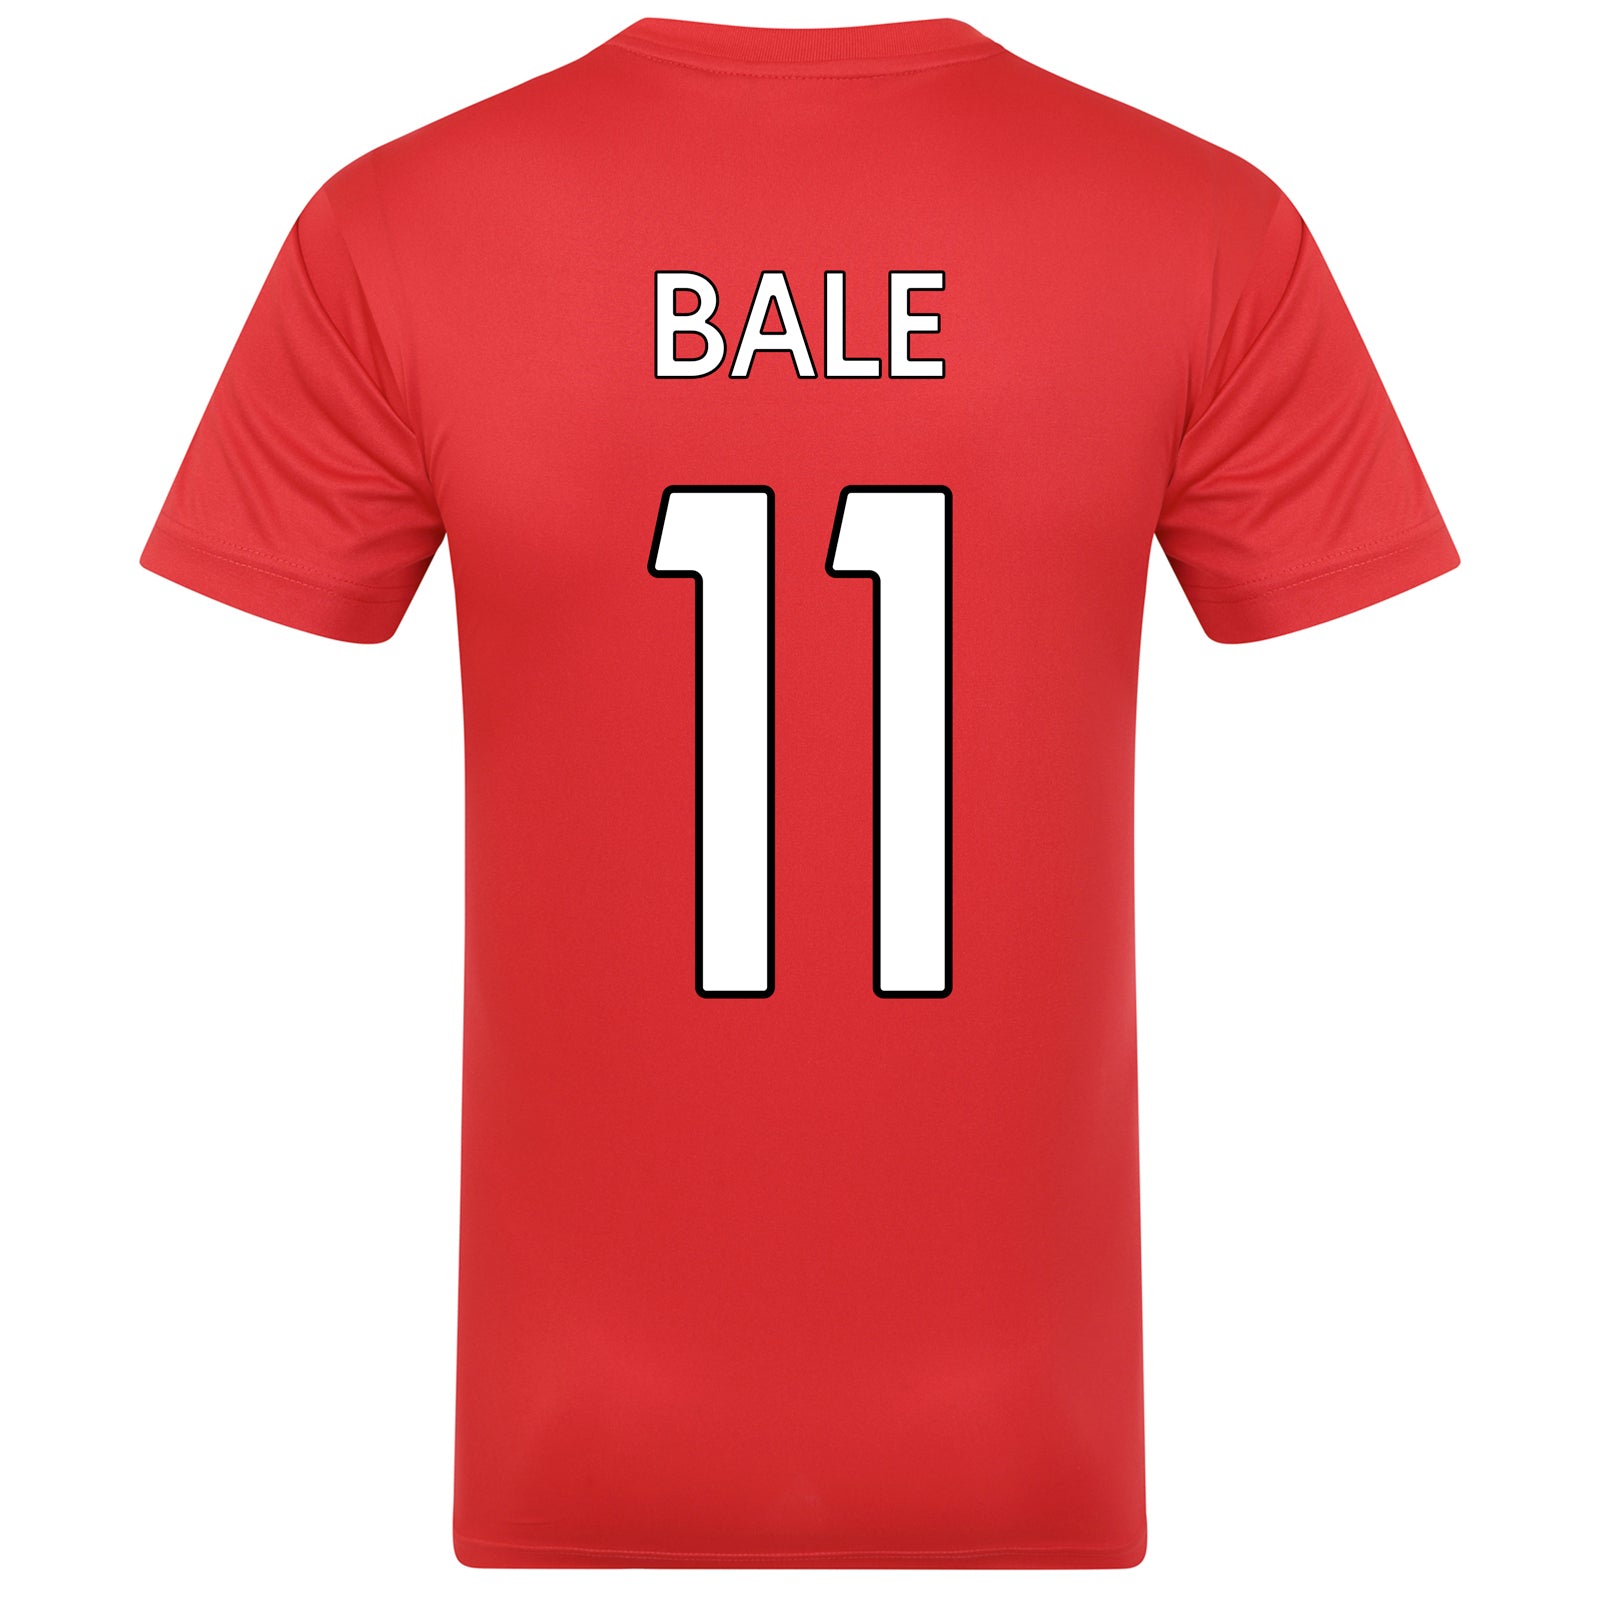 Red Bale 11